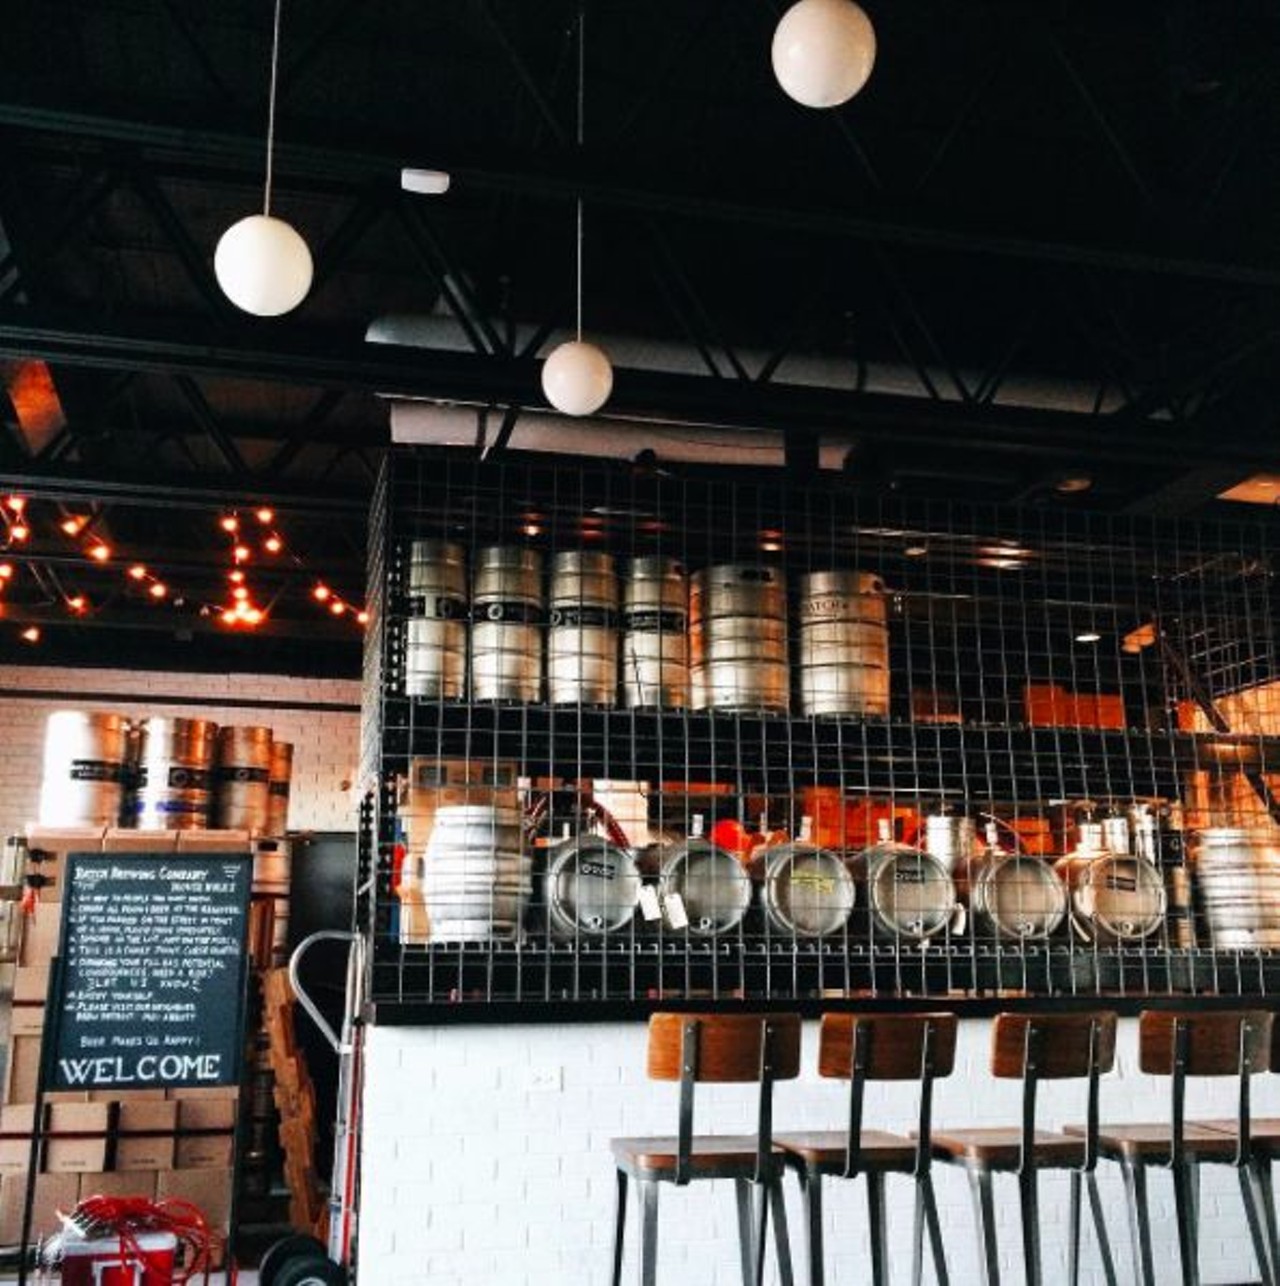 Batch Brewing Company
1400 Porter St., Detroit 
One of Corktown&#146;s newest spots is Batch Brewing Company. Not only do they have delicious food, but the beer selection is pretty prime, too. Grab a flight of their delicious homemade brews. Photo via @laurajude.